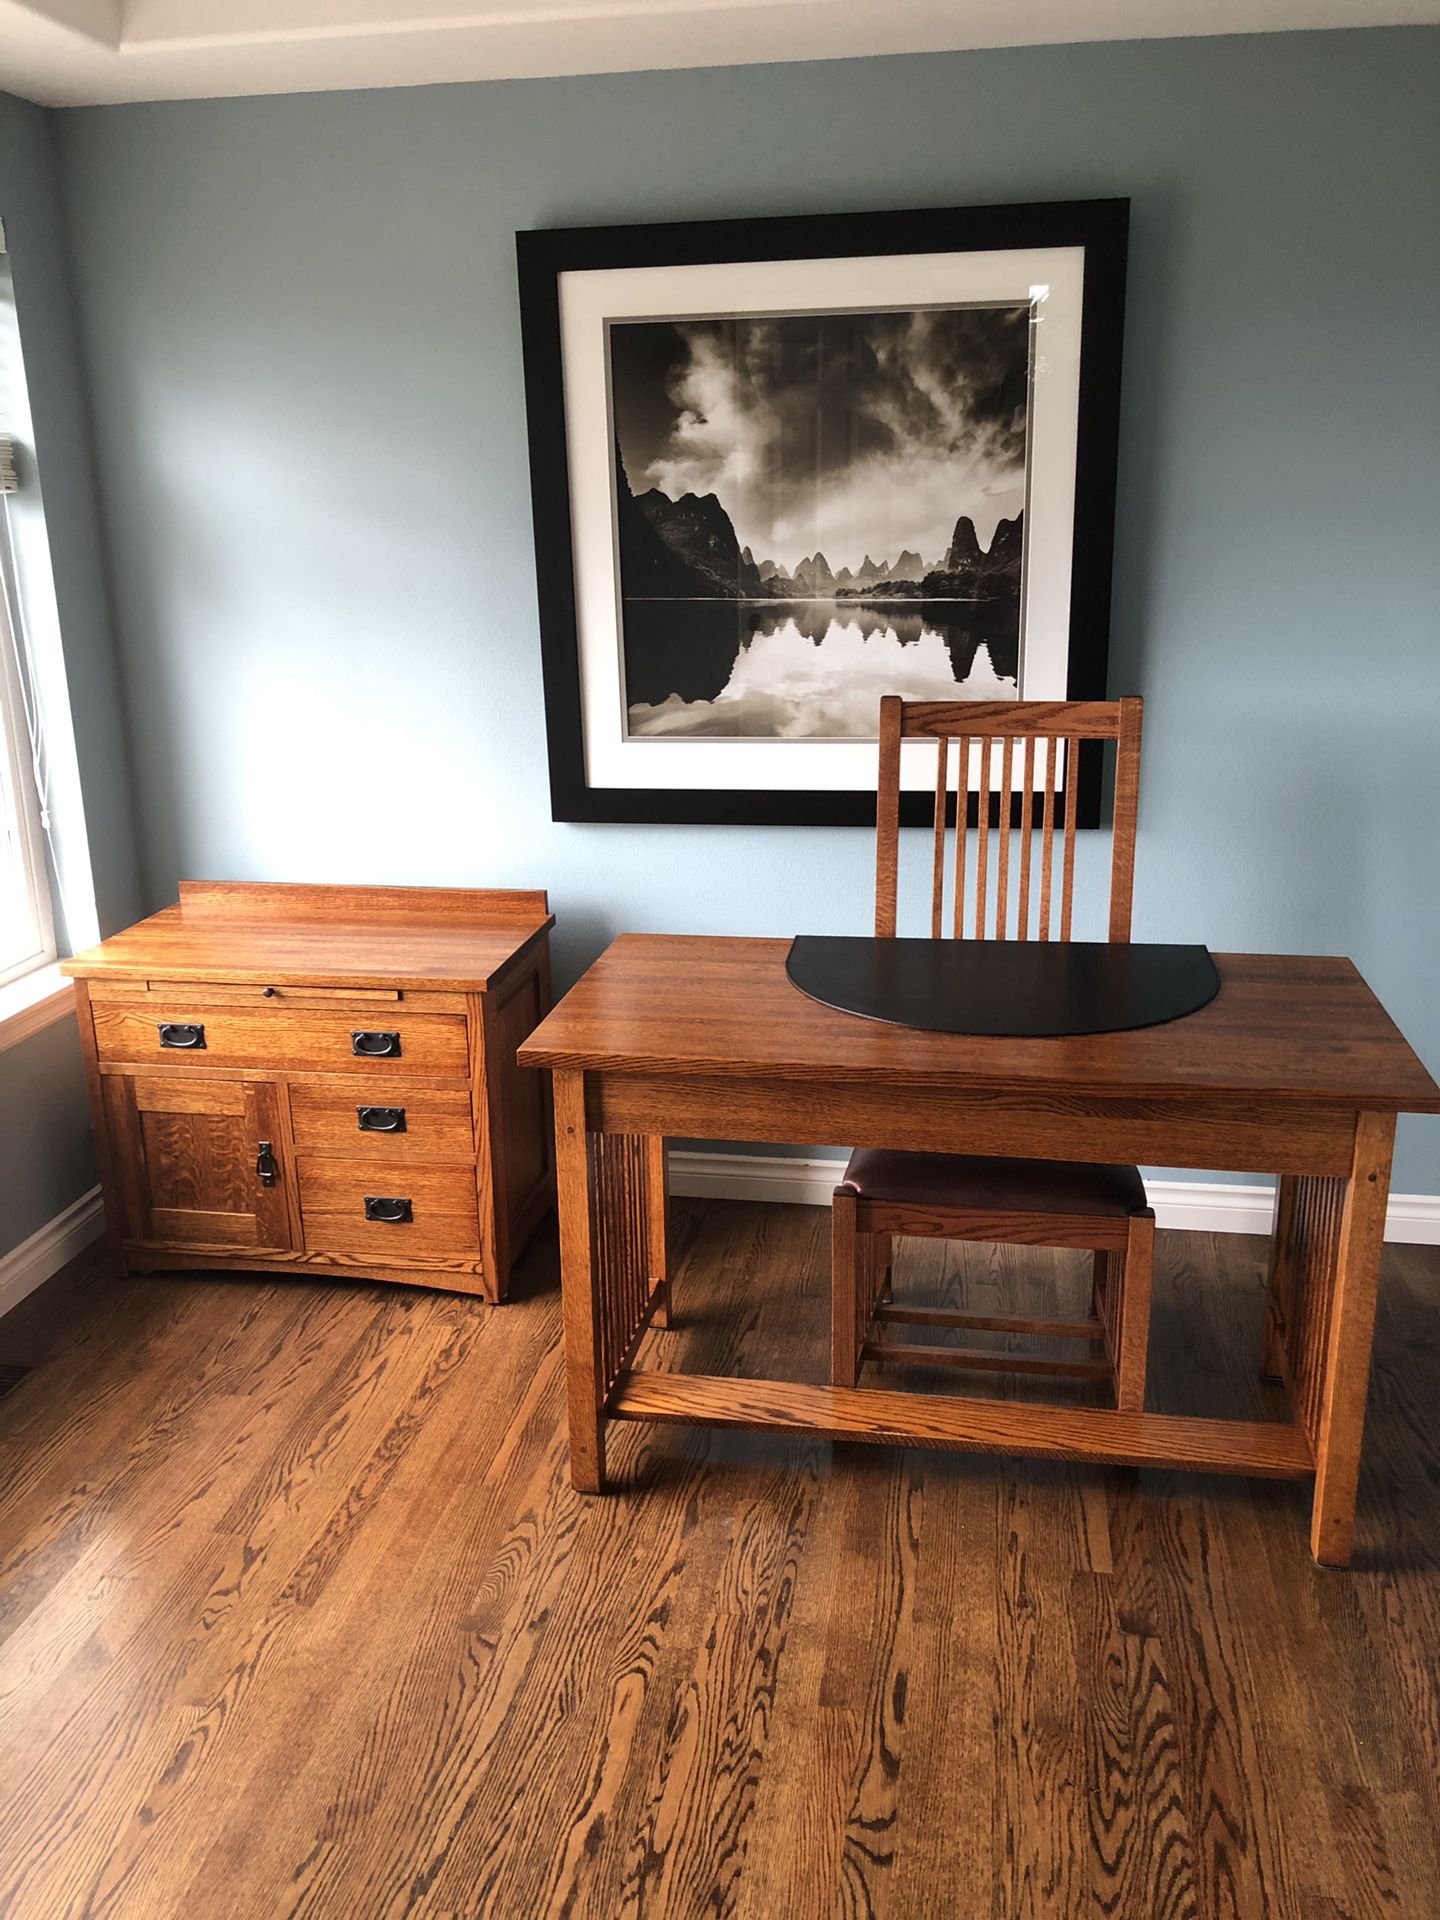 Restoration Hardware Mission style desk with secretary and chair